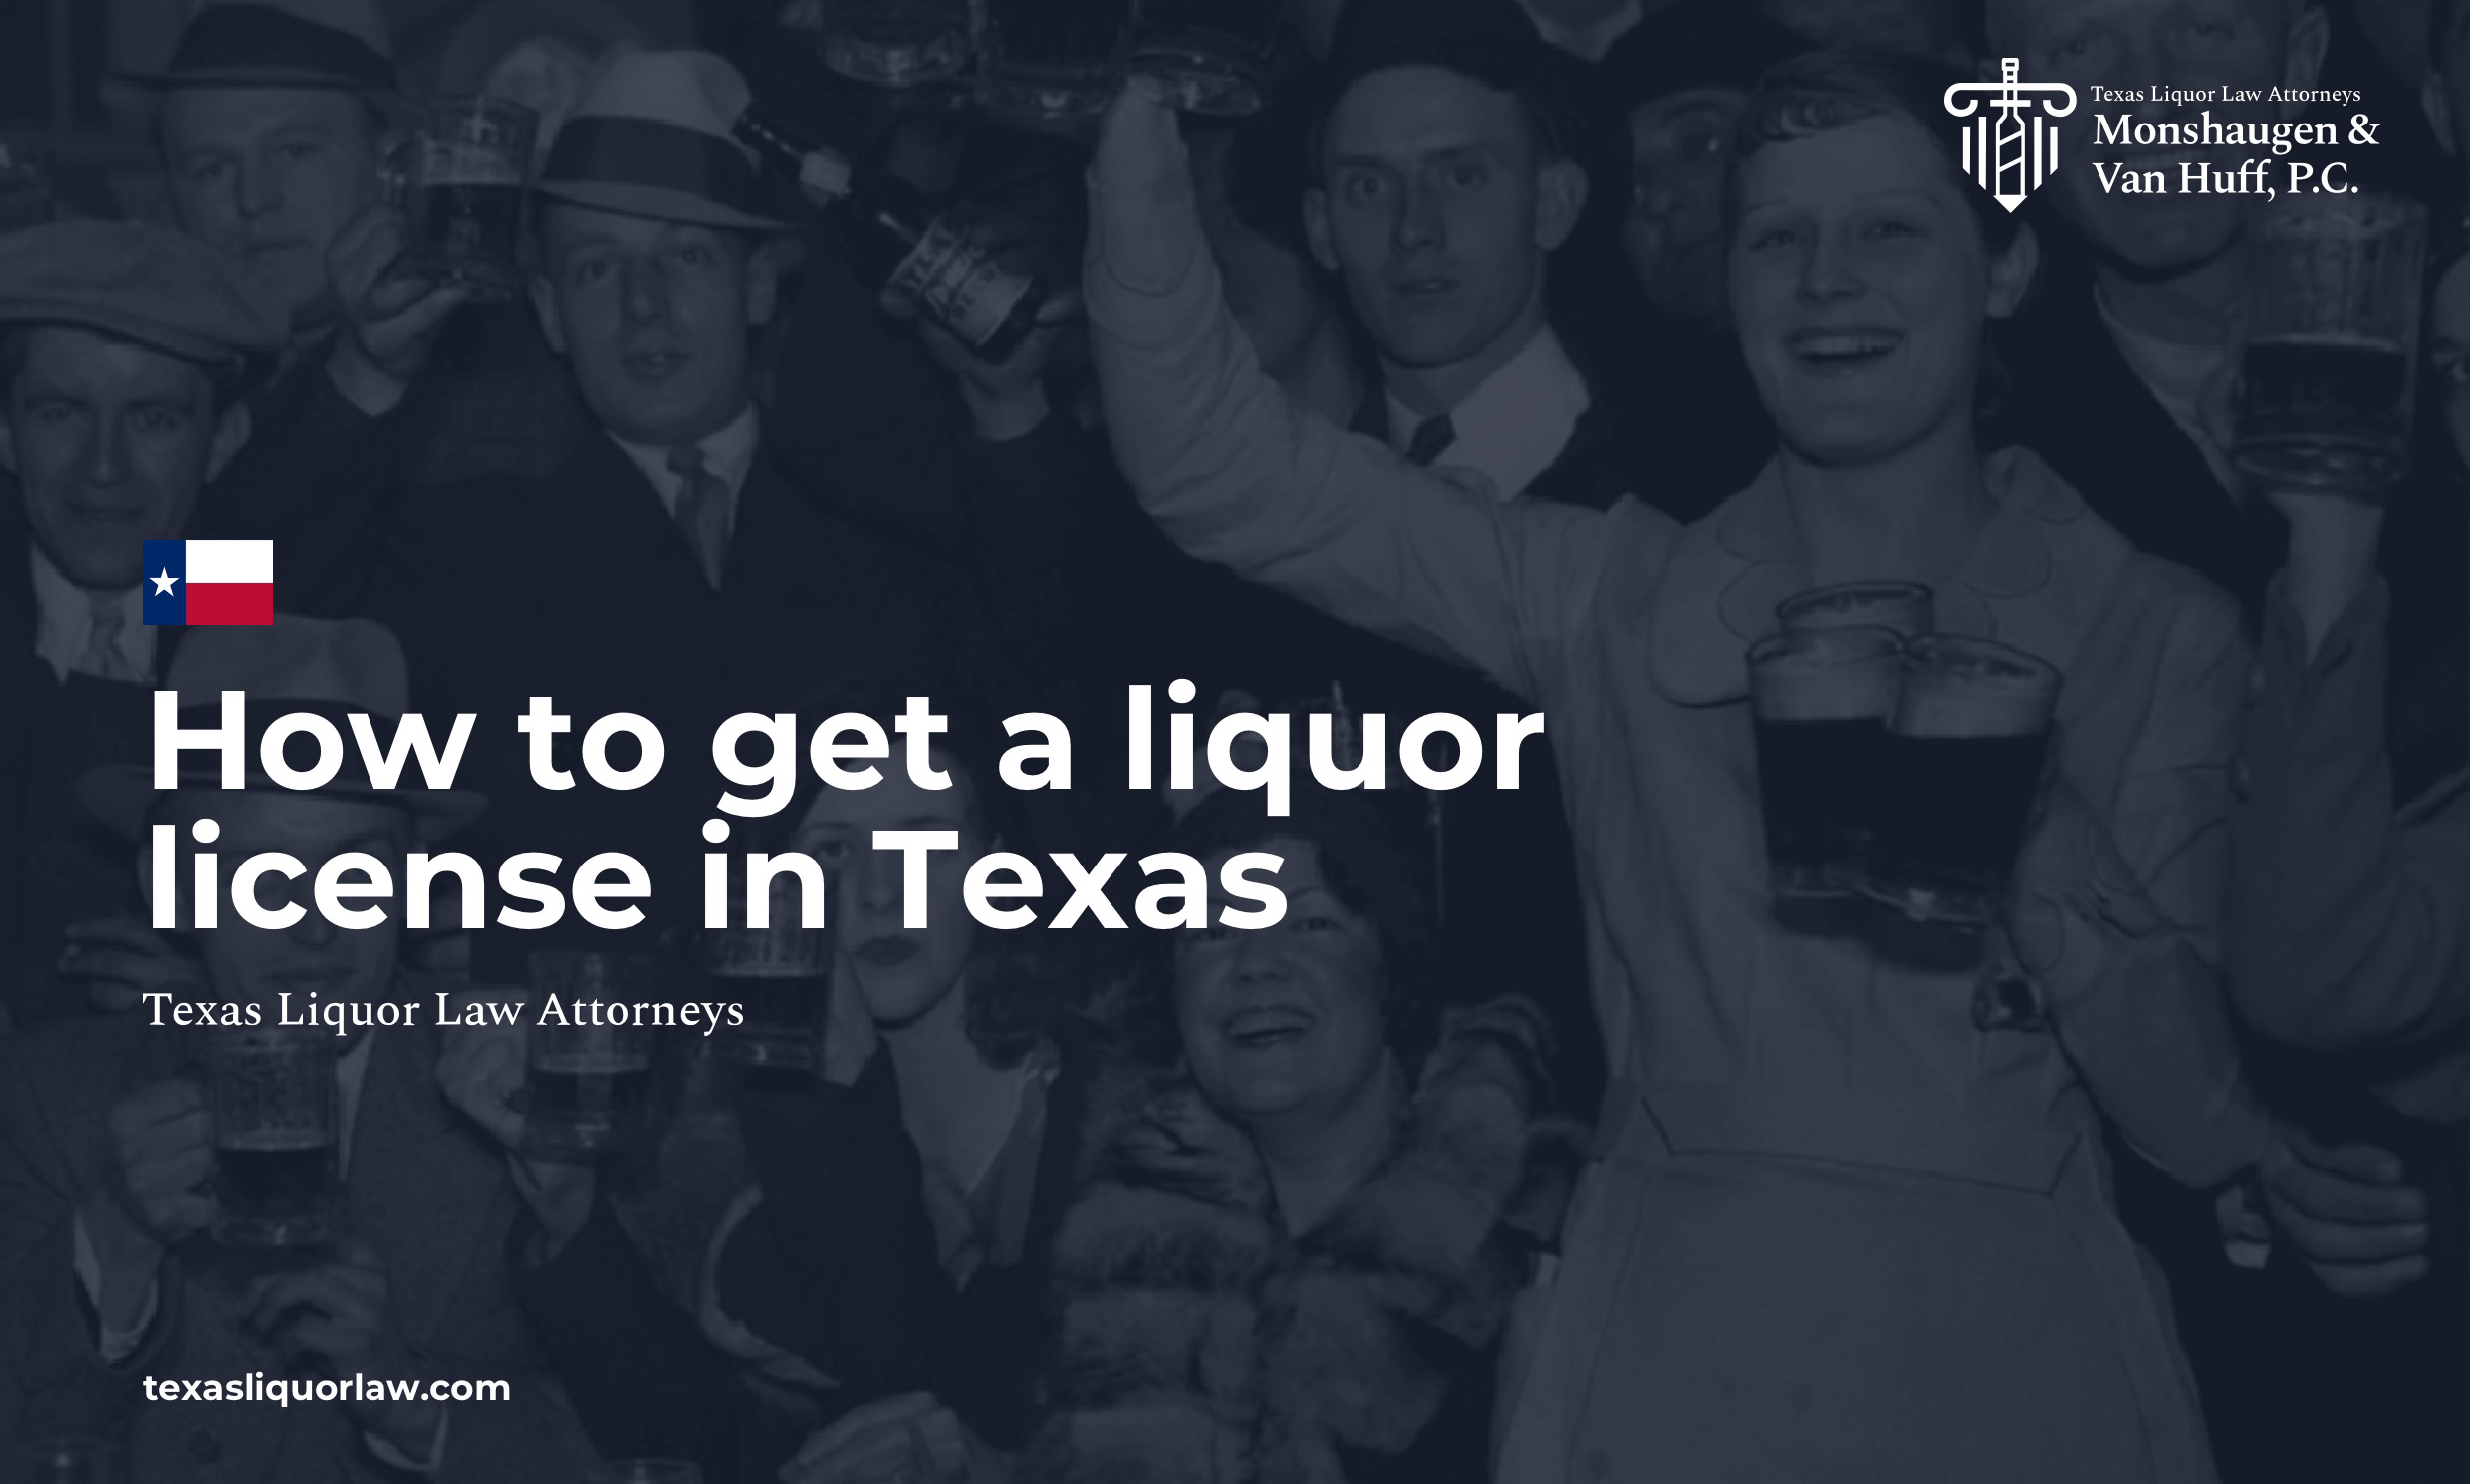 How to get a liquor license in Texas